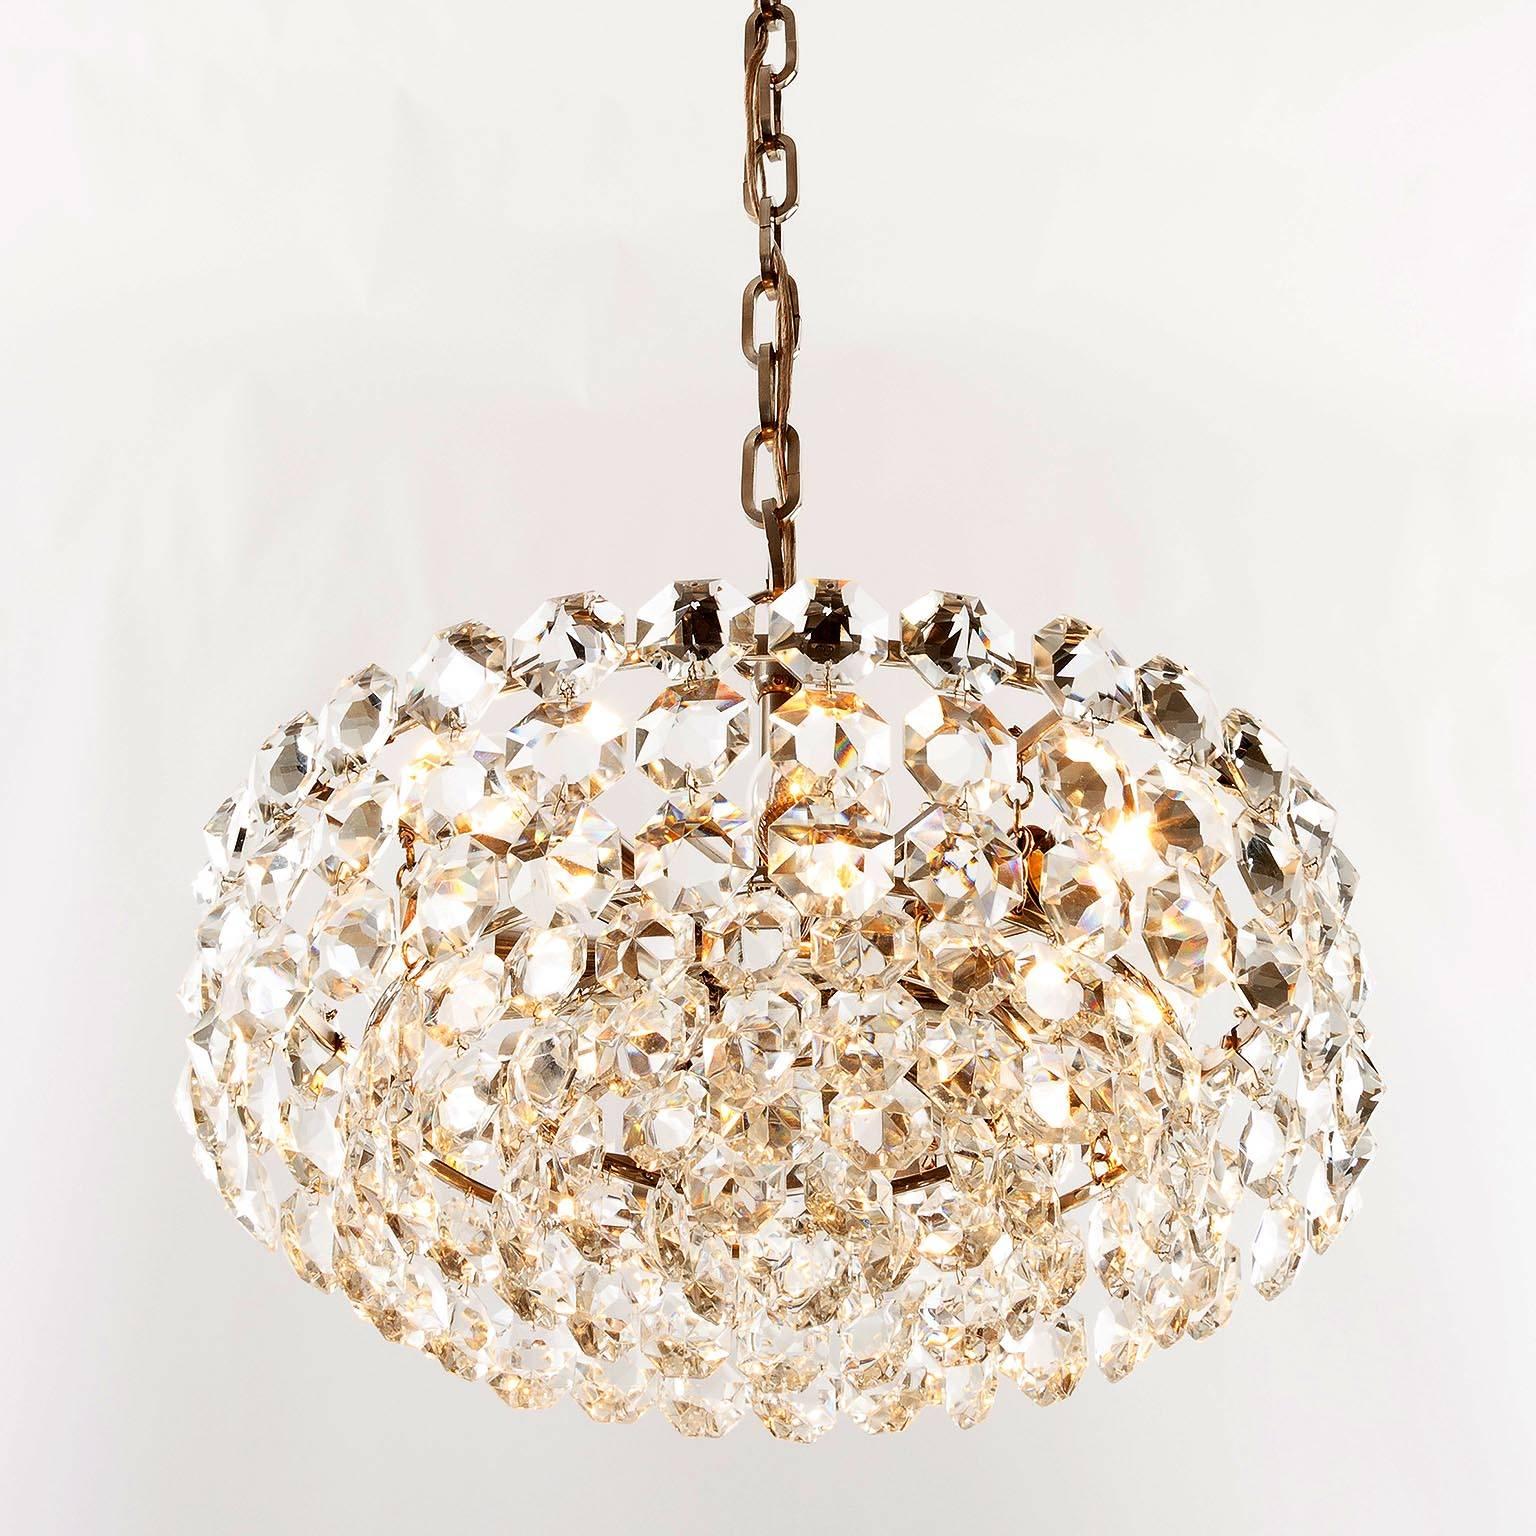 One of Two Bakalowits Chandeliers Pendant Lights, Nickel Glass, 1960s For Sale 6